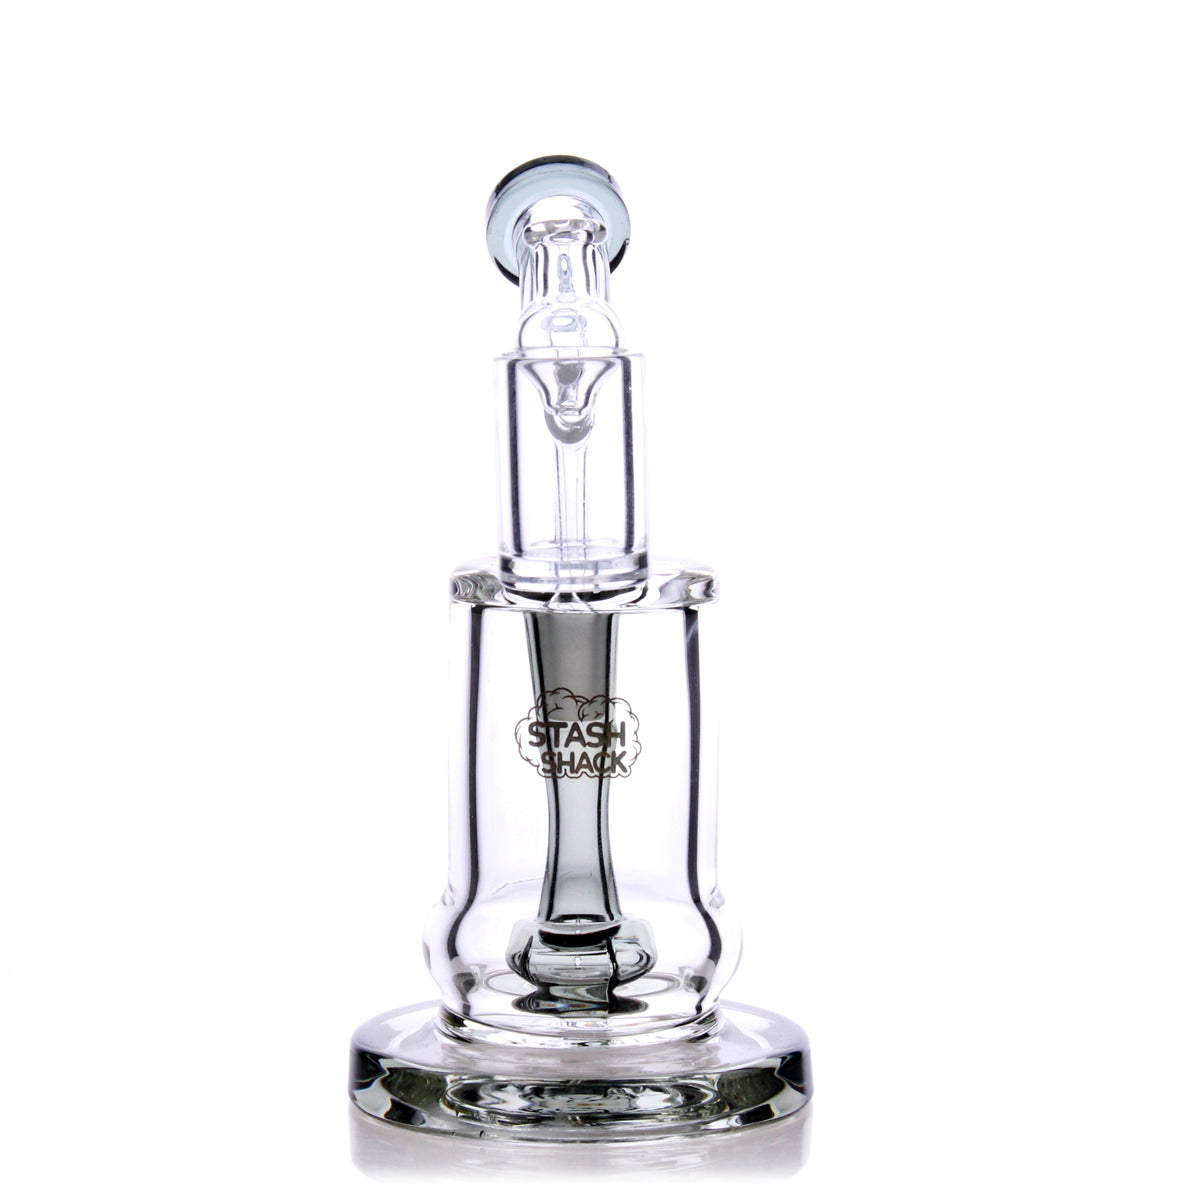 HydroBarrel Mini Rig by The Stash Shack, compact 5" borosilicate glass dab rig with showerhead percolator, front view